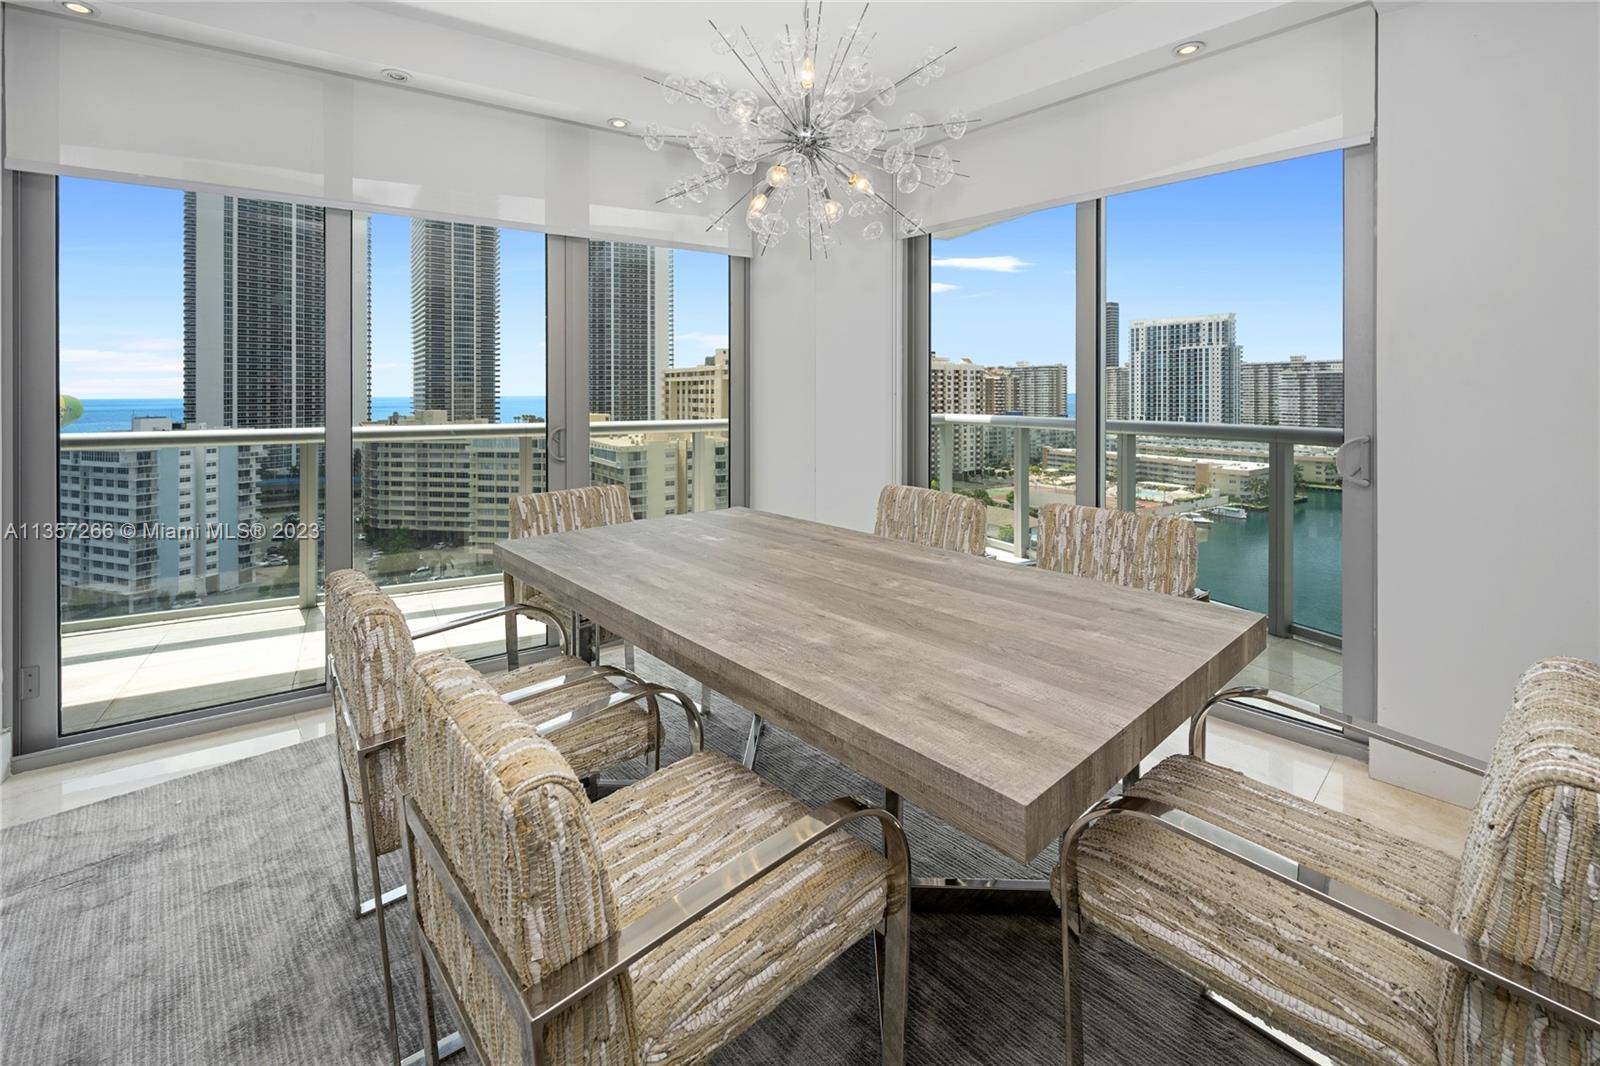 Spectacular 3 3 with Panoramic views of the ocean, Intercostal city skyline.